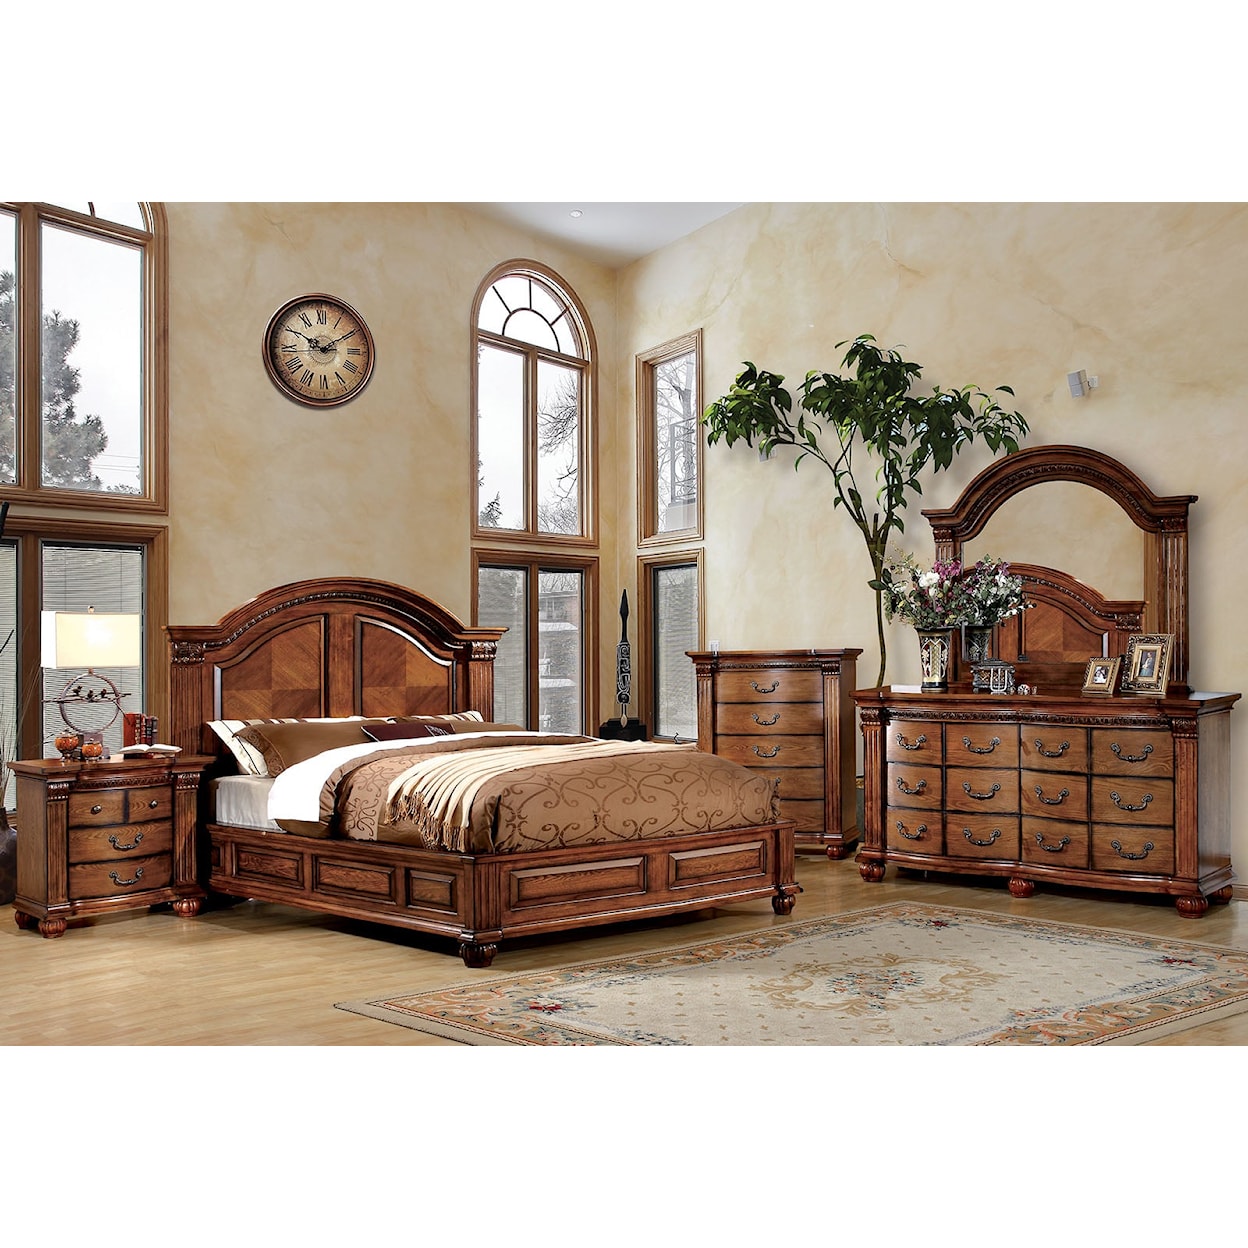 Furniture of America Bellagrand 5 Pc. Queen Bedroom Set w/ 2NS